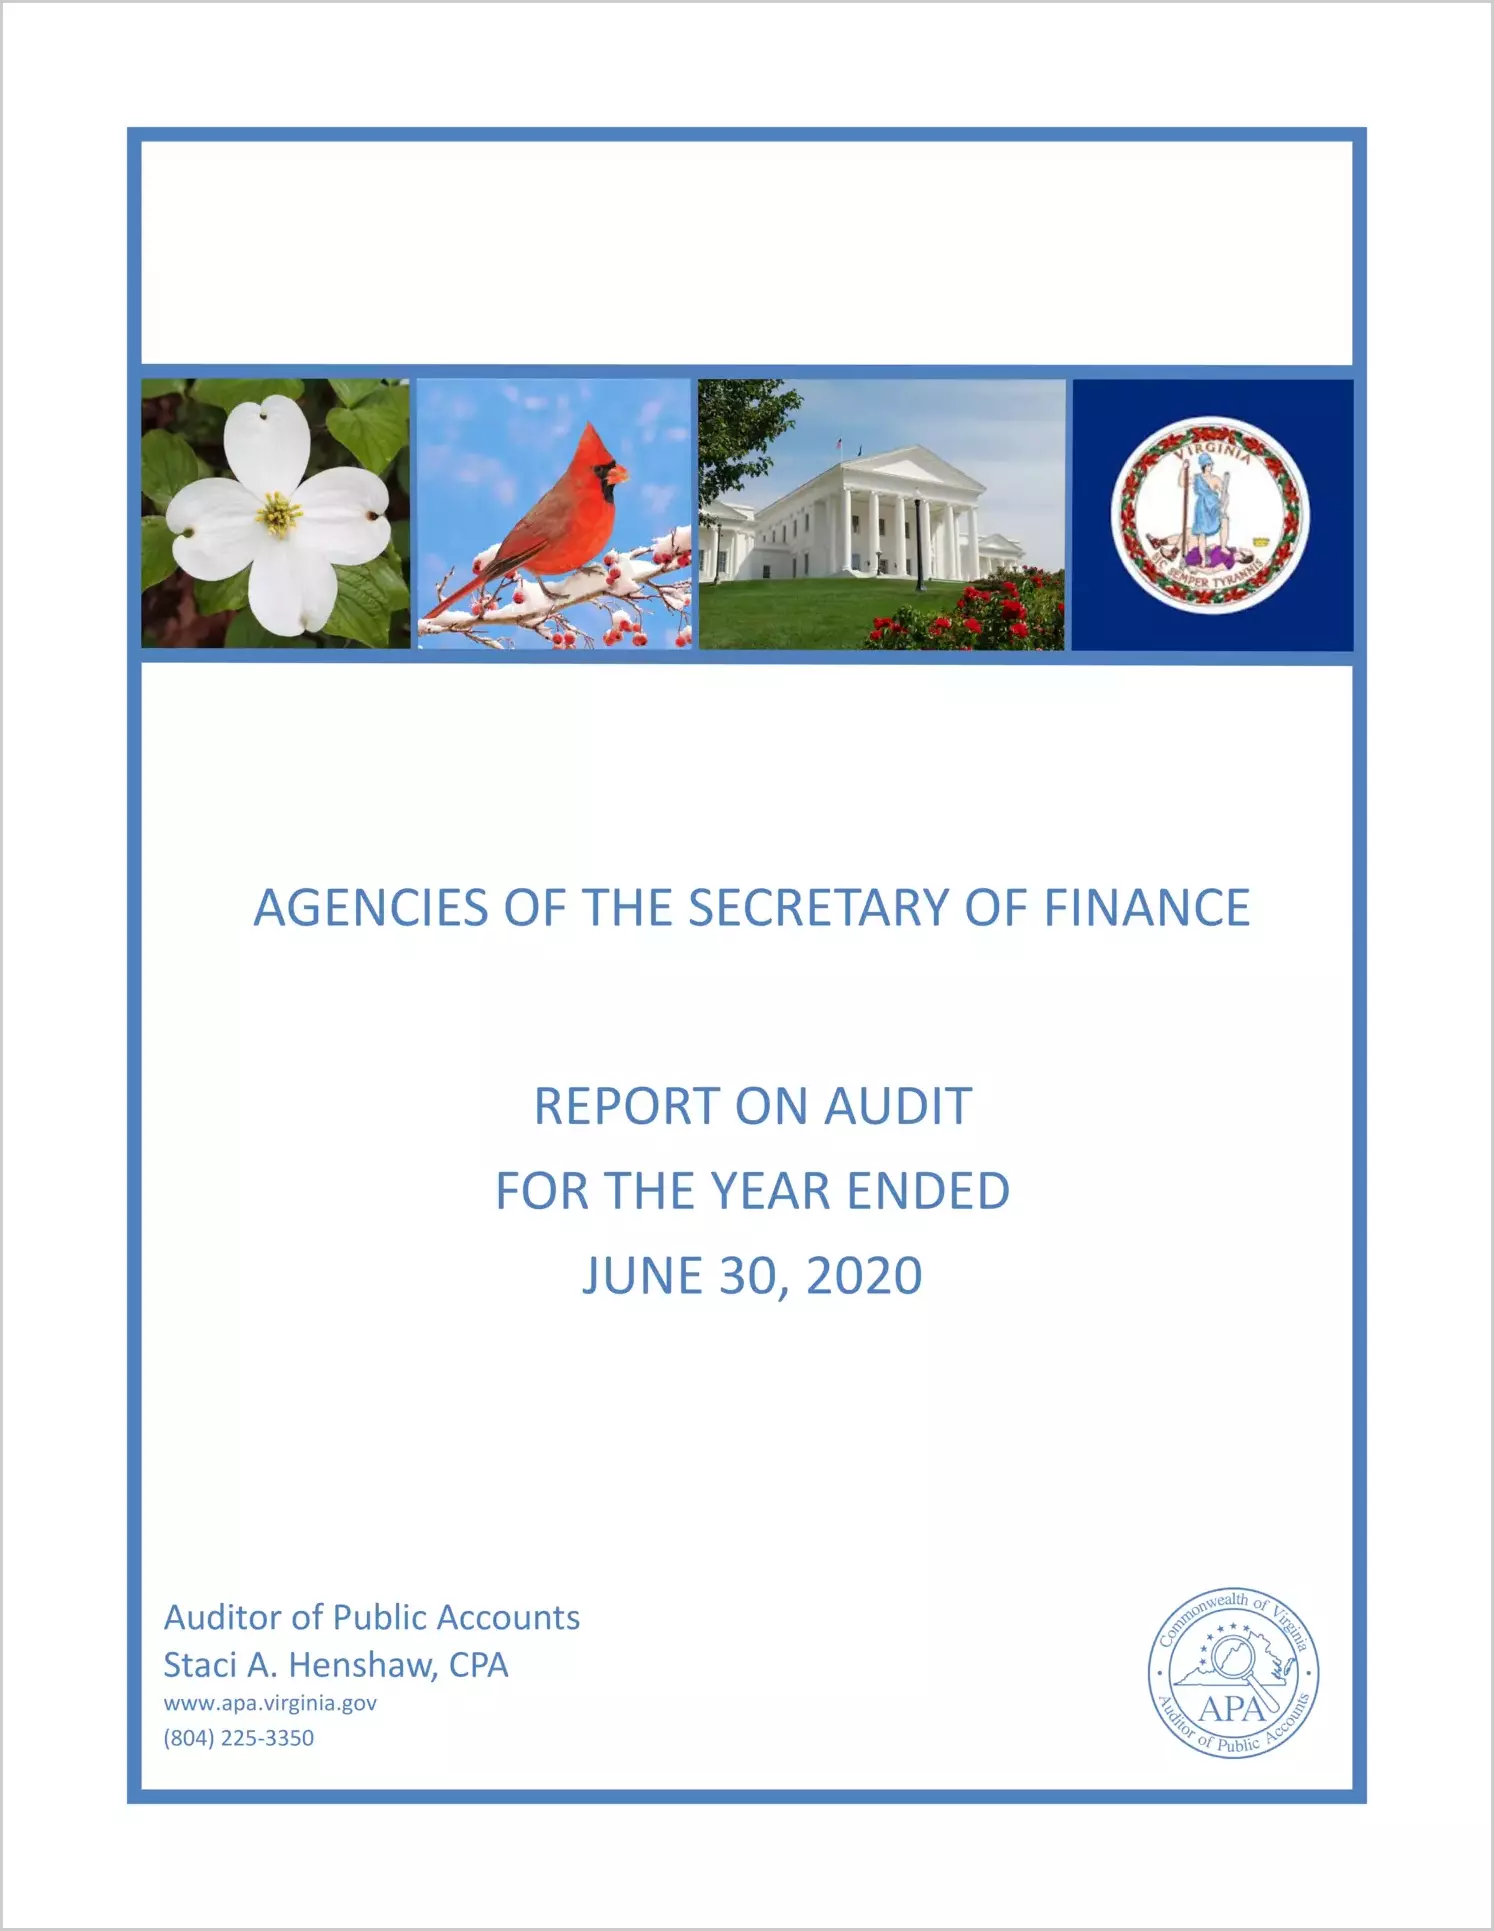 Agencies of the Secretary of Finance for the year ended June 30, 2020